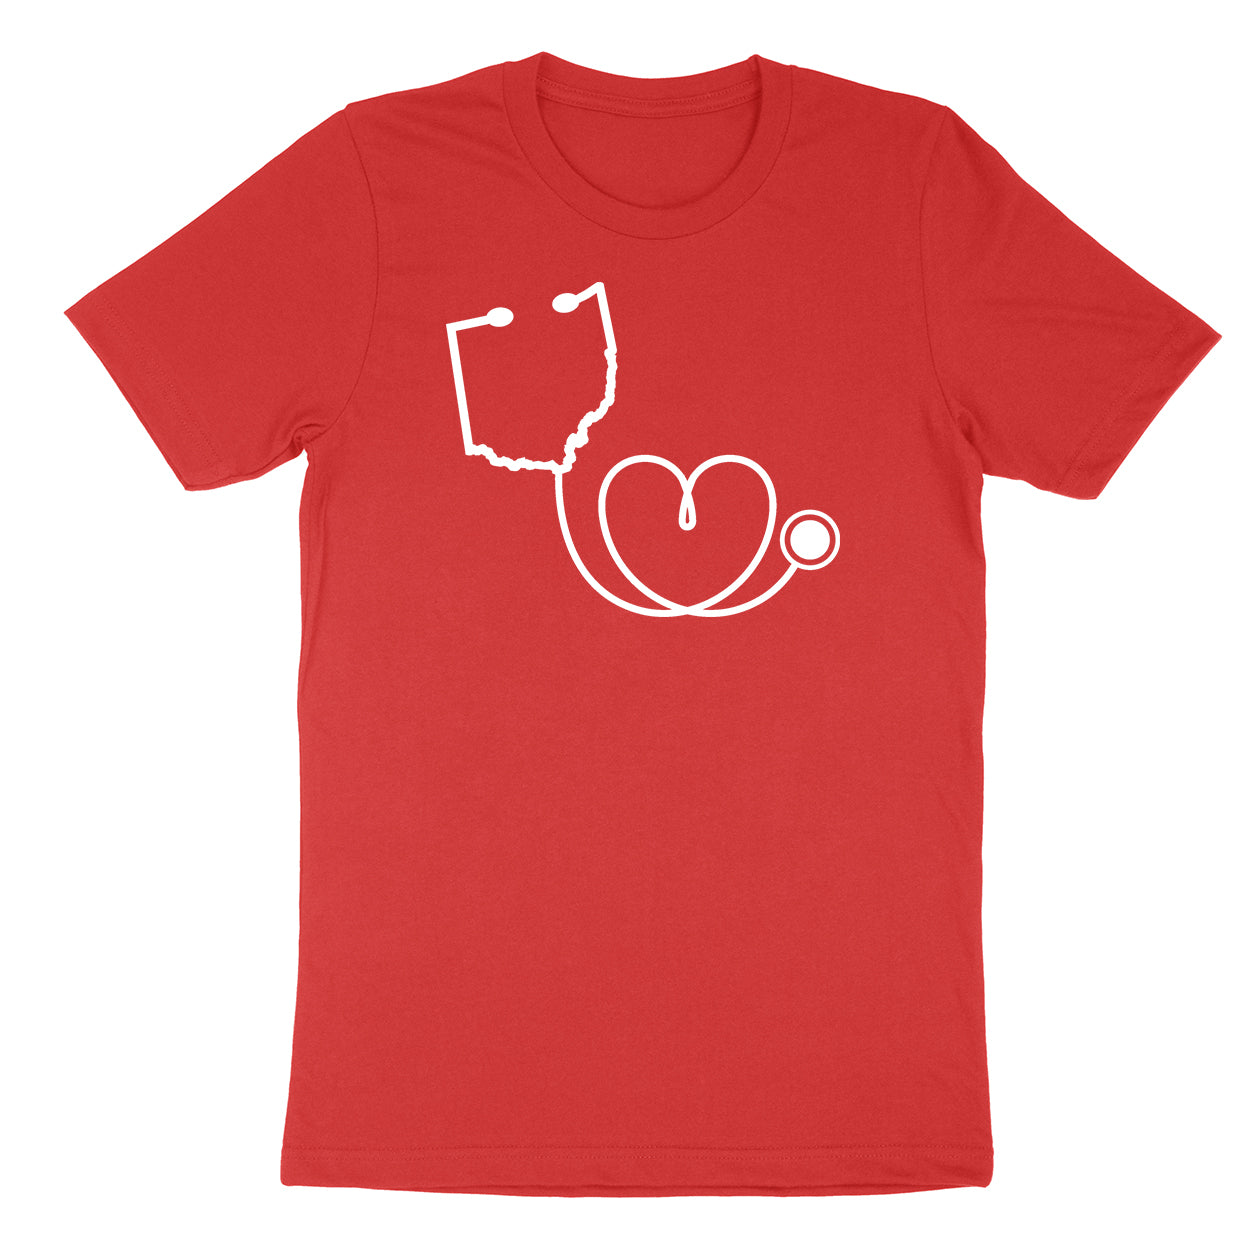 Ohio Loves Healthcare - Youth T-Shirt